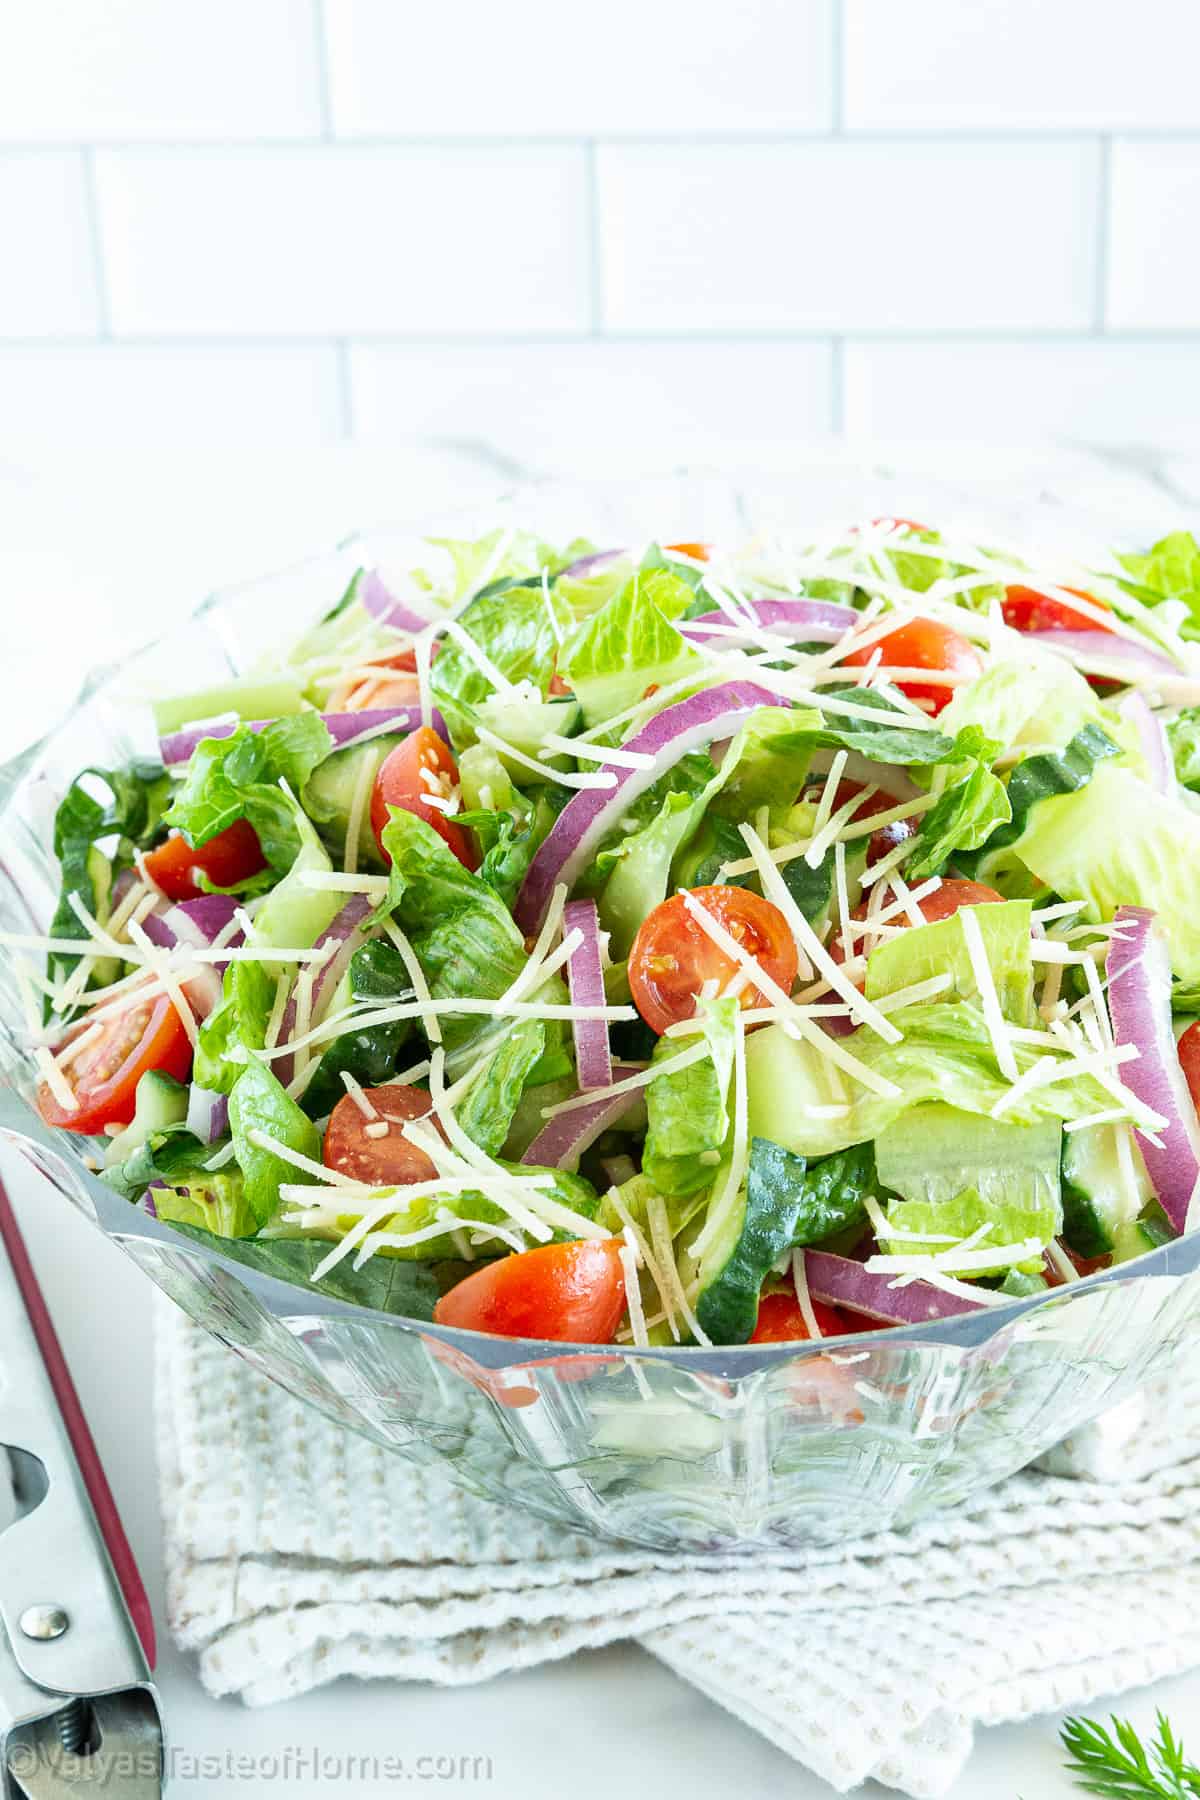 https://www.valyastasteofhome.com/wp-content/uploads/2015/12/Quick-and-Easy-Romaine-Salad-with-an-Olive-Garden-Dressing-1.jpg